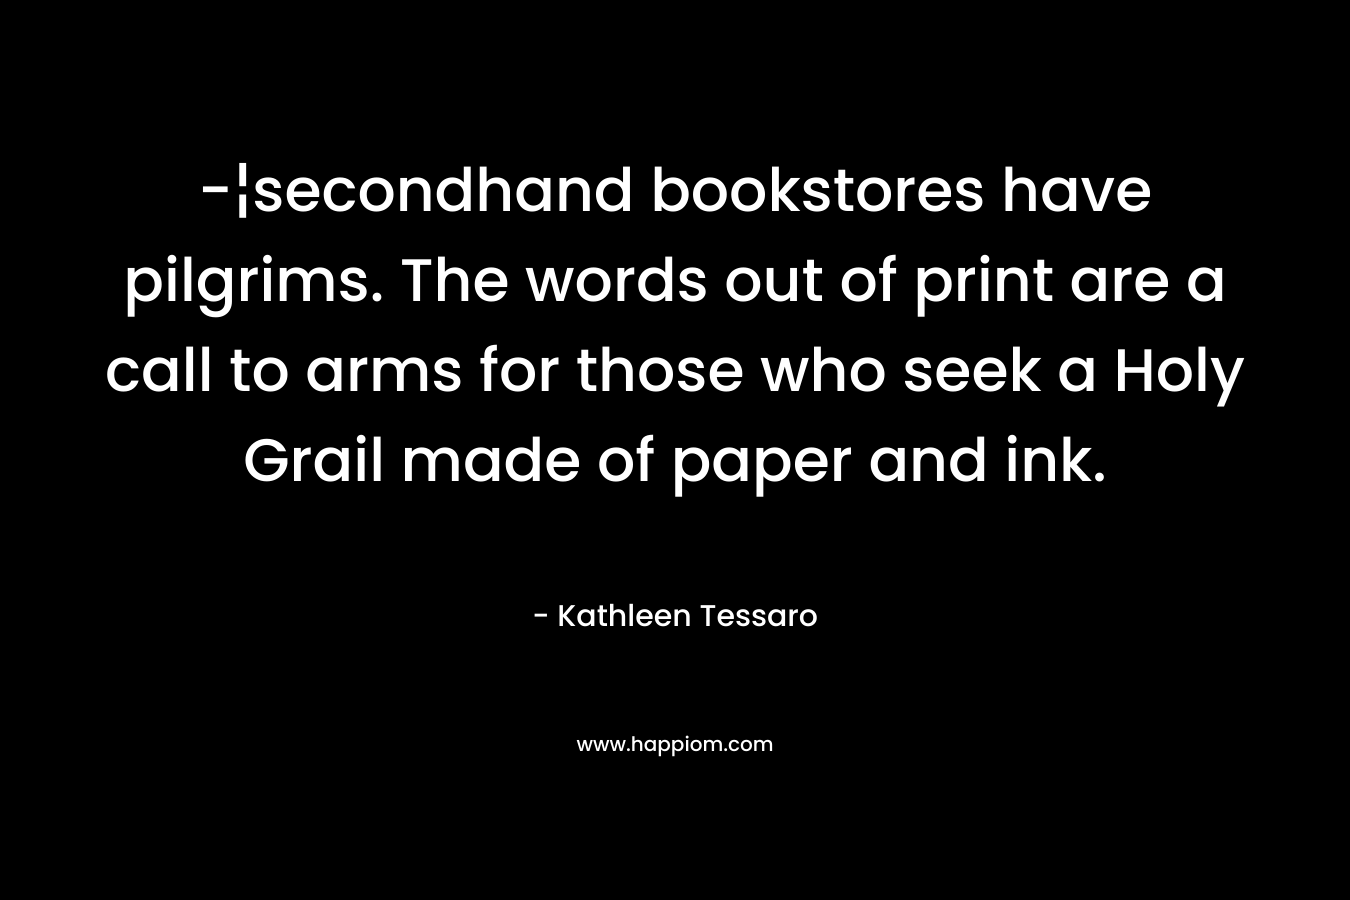 -¦secondhand bookstores have pilgrims. The words out of print are a call to arms for those who seek a Holy Grail made of paper and ink. – Kathleen Tessaro